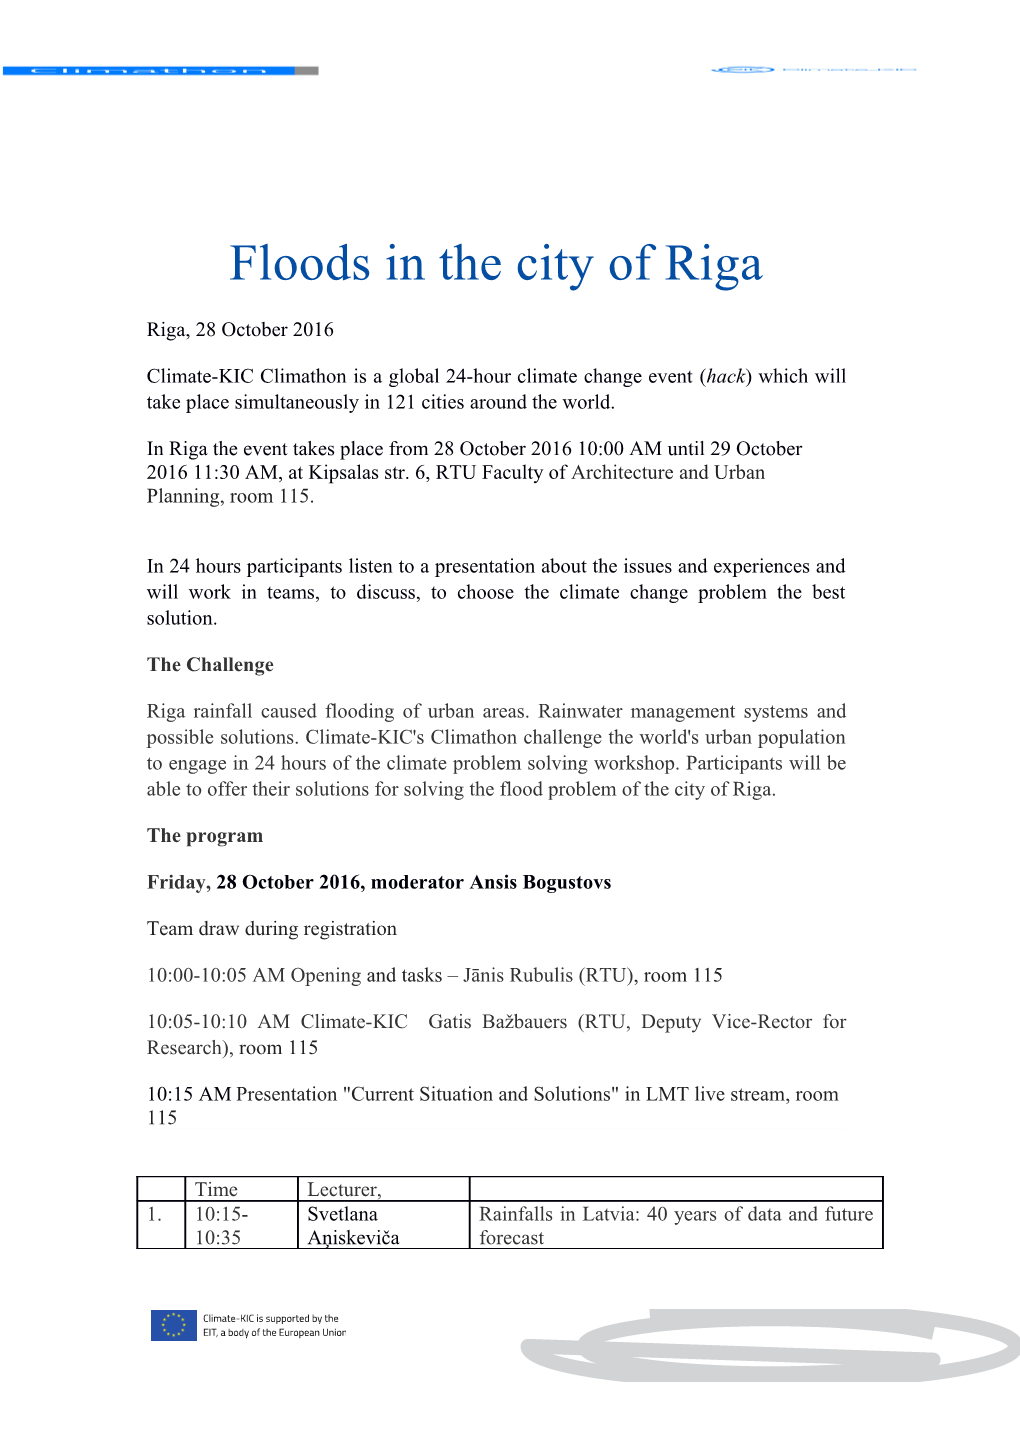 Floods in the City of Riga